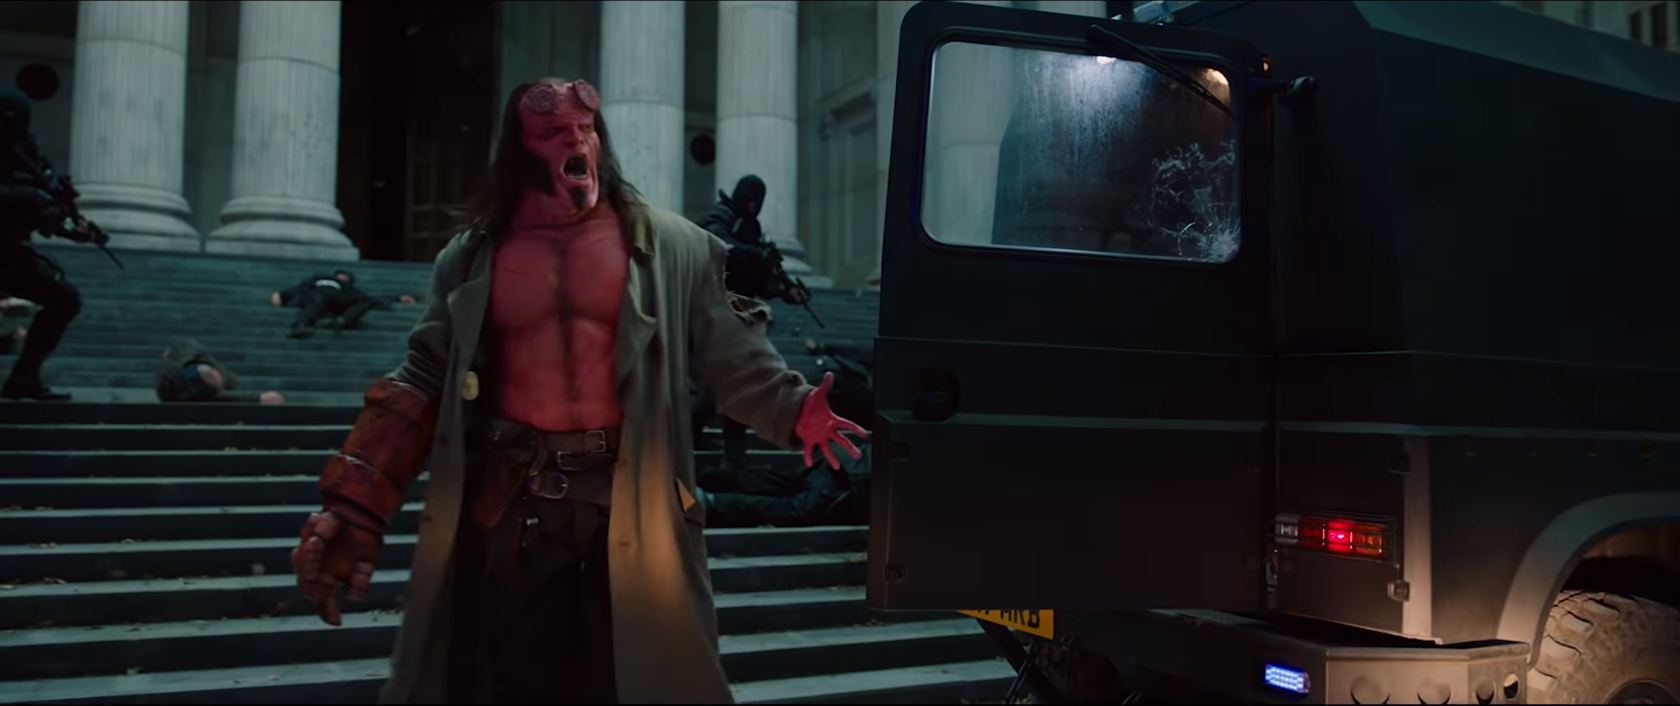 Hellboy terrifies the people he's destined to save